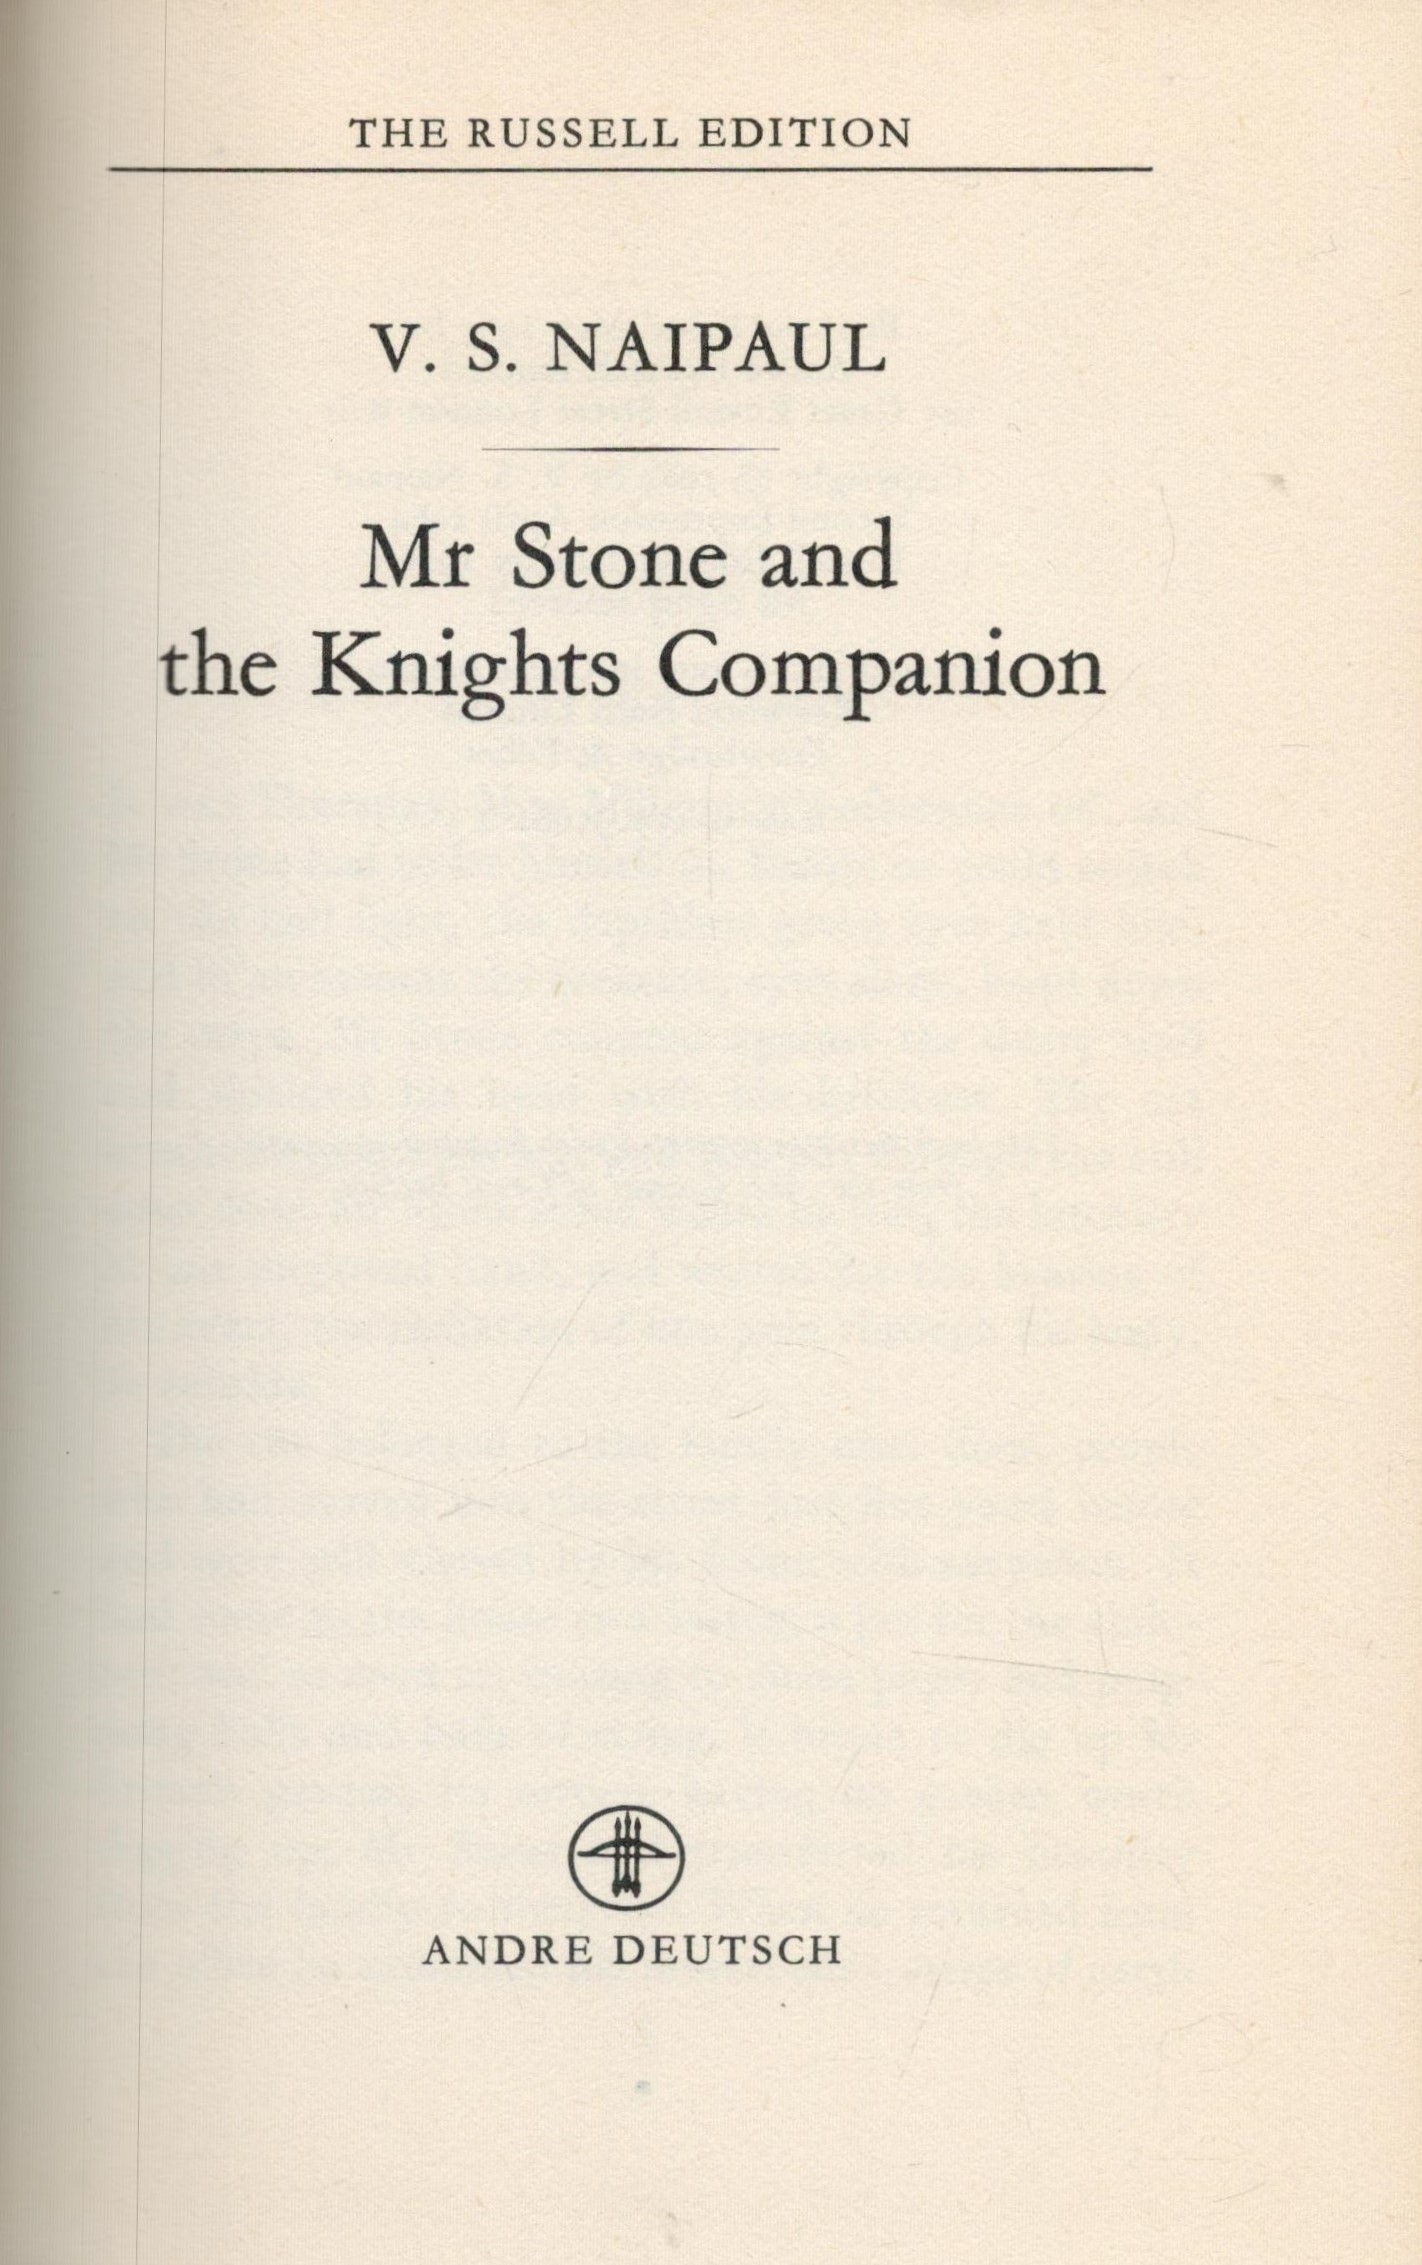 Mr Stone and the Knights Companion by V S Naipaul 1978 Russell Edition Hardback Book with 160 - Image 2 of 3